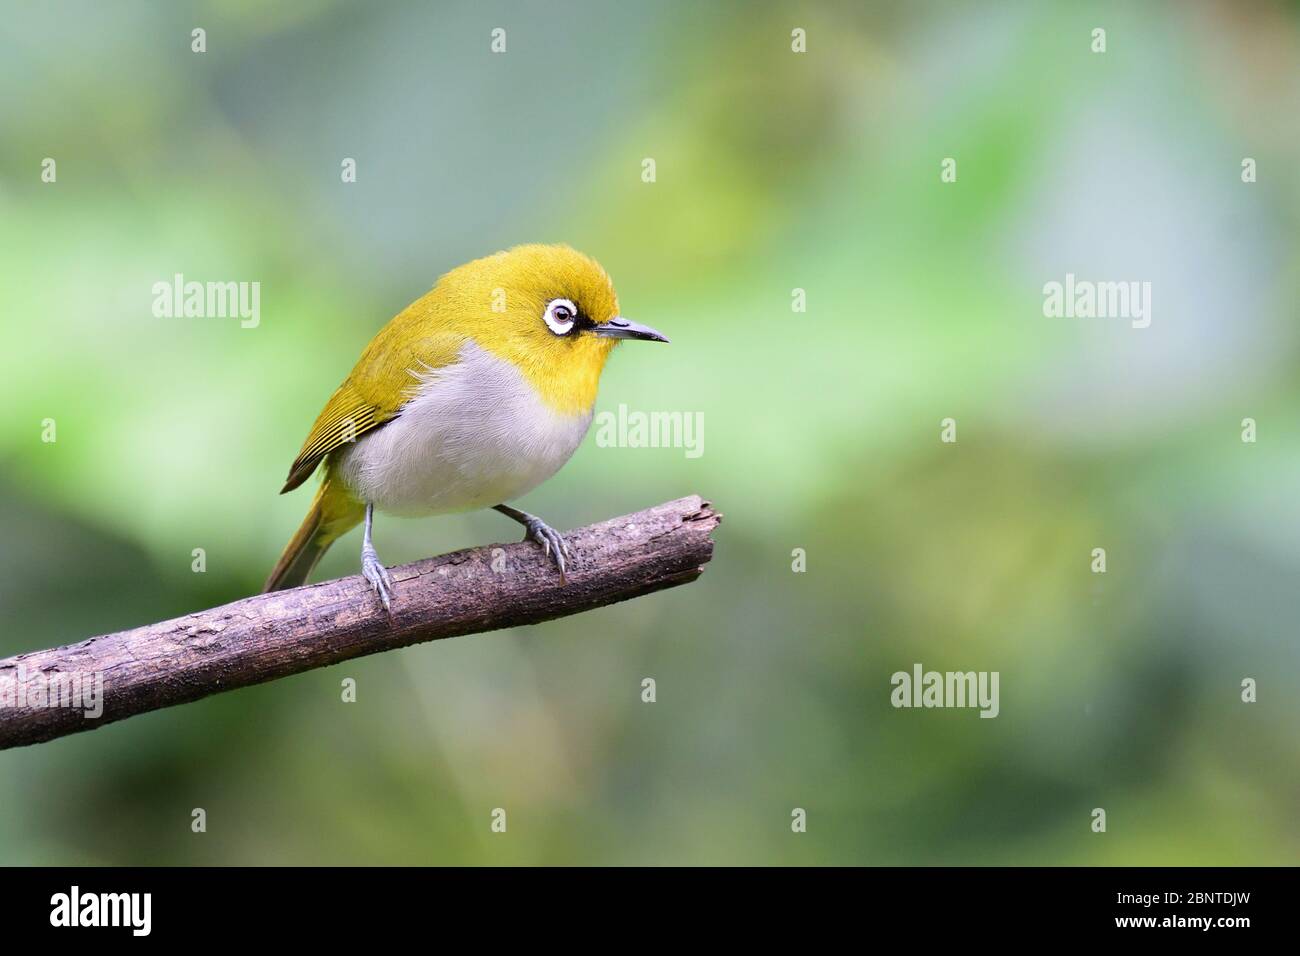 Oriental white-eye is hyperactive little yellow bird with an off-white belly and white spectacles. Found in a wide range of habitats. Stock Photo